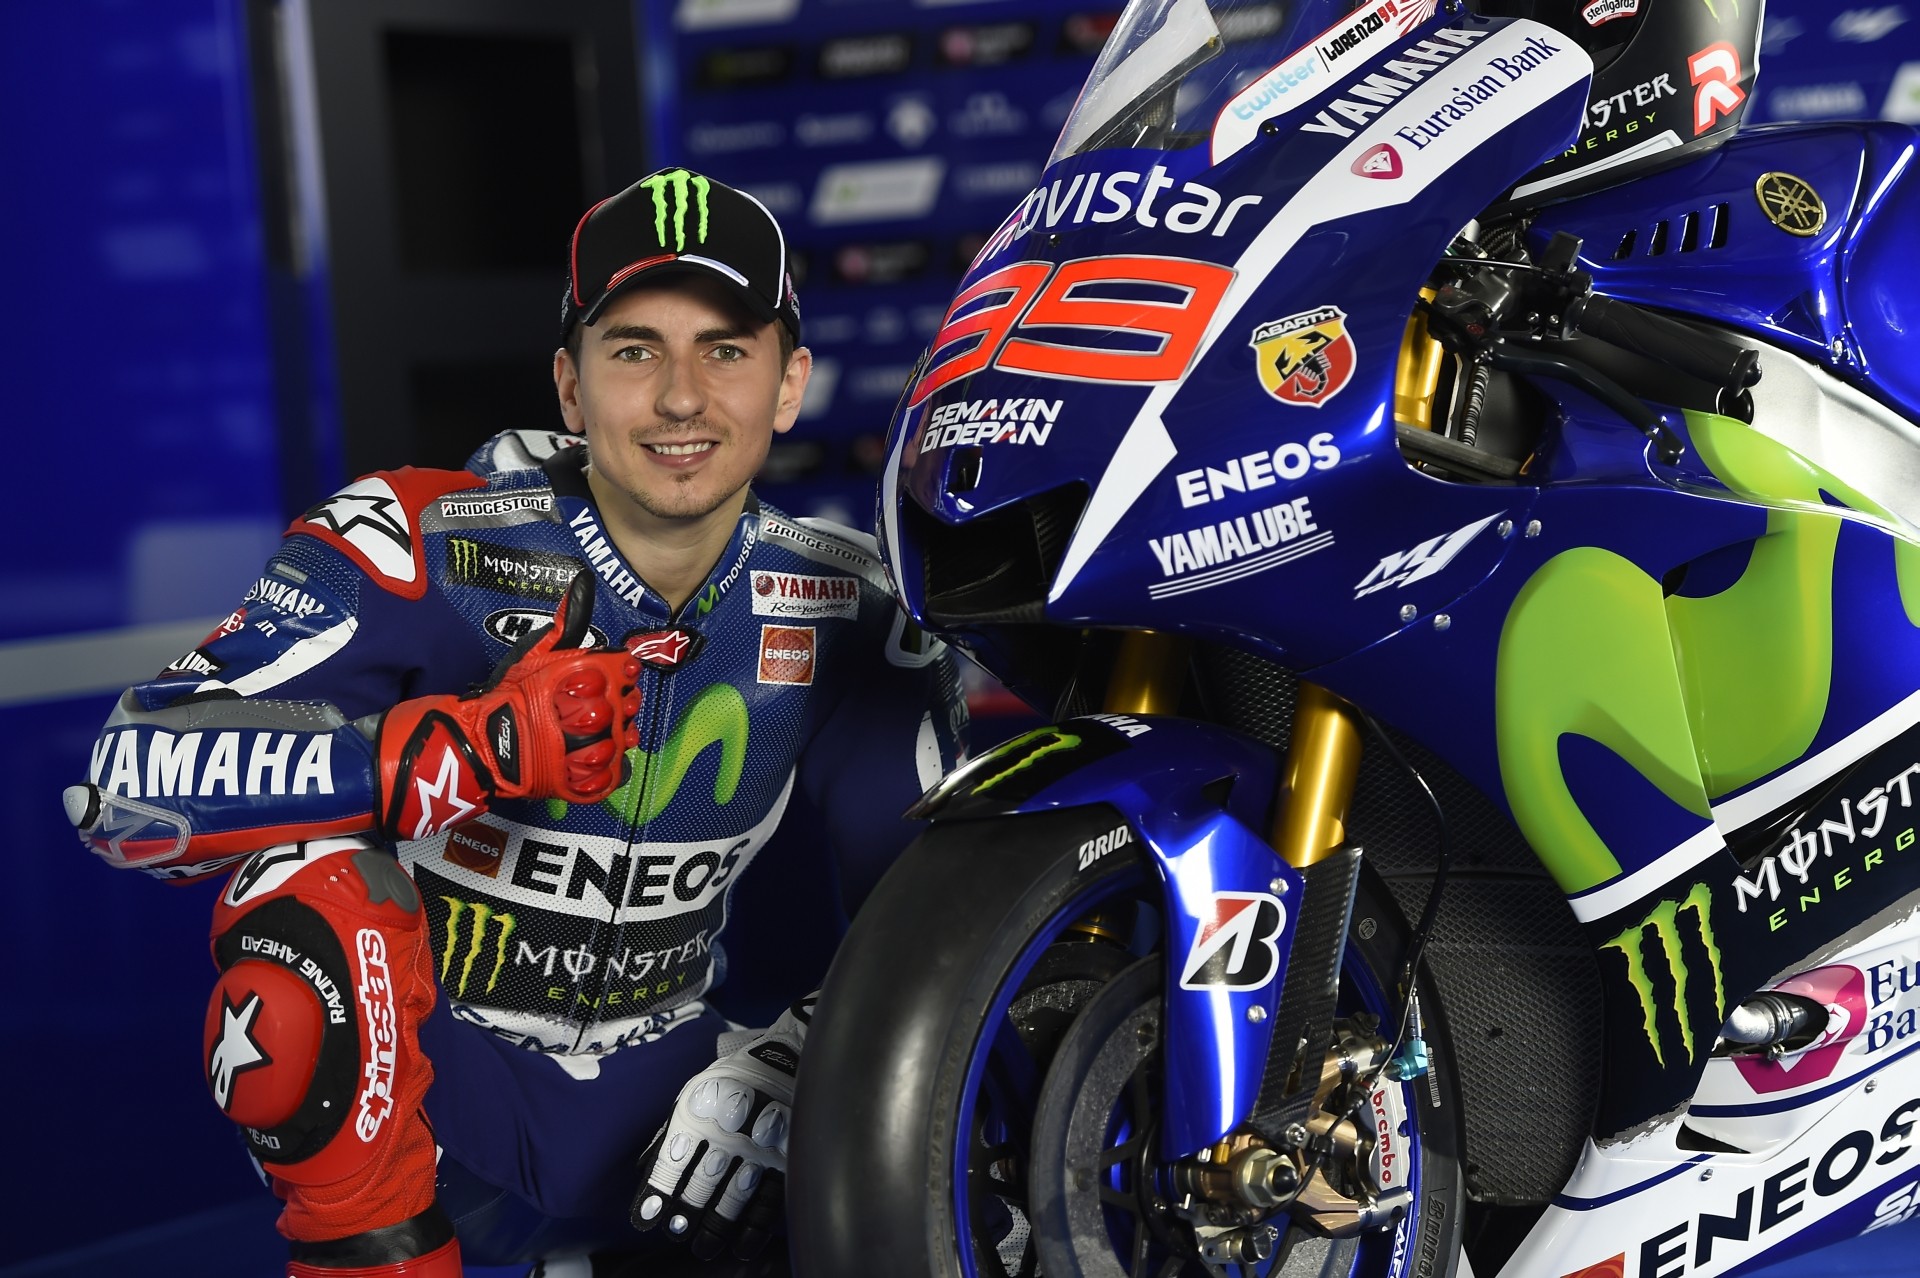 High Res Photos Of The 2015 Yamaha YZR M1 With Rossi And Lorenzo